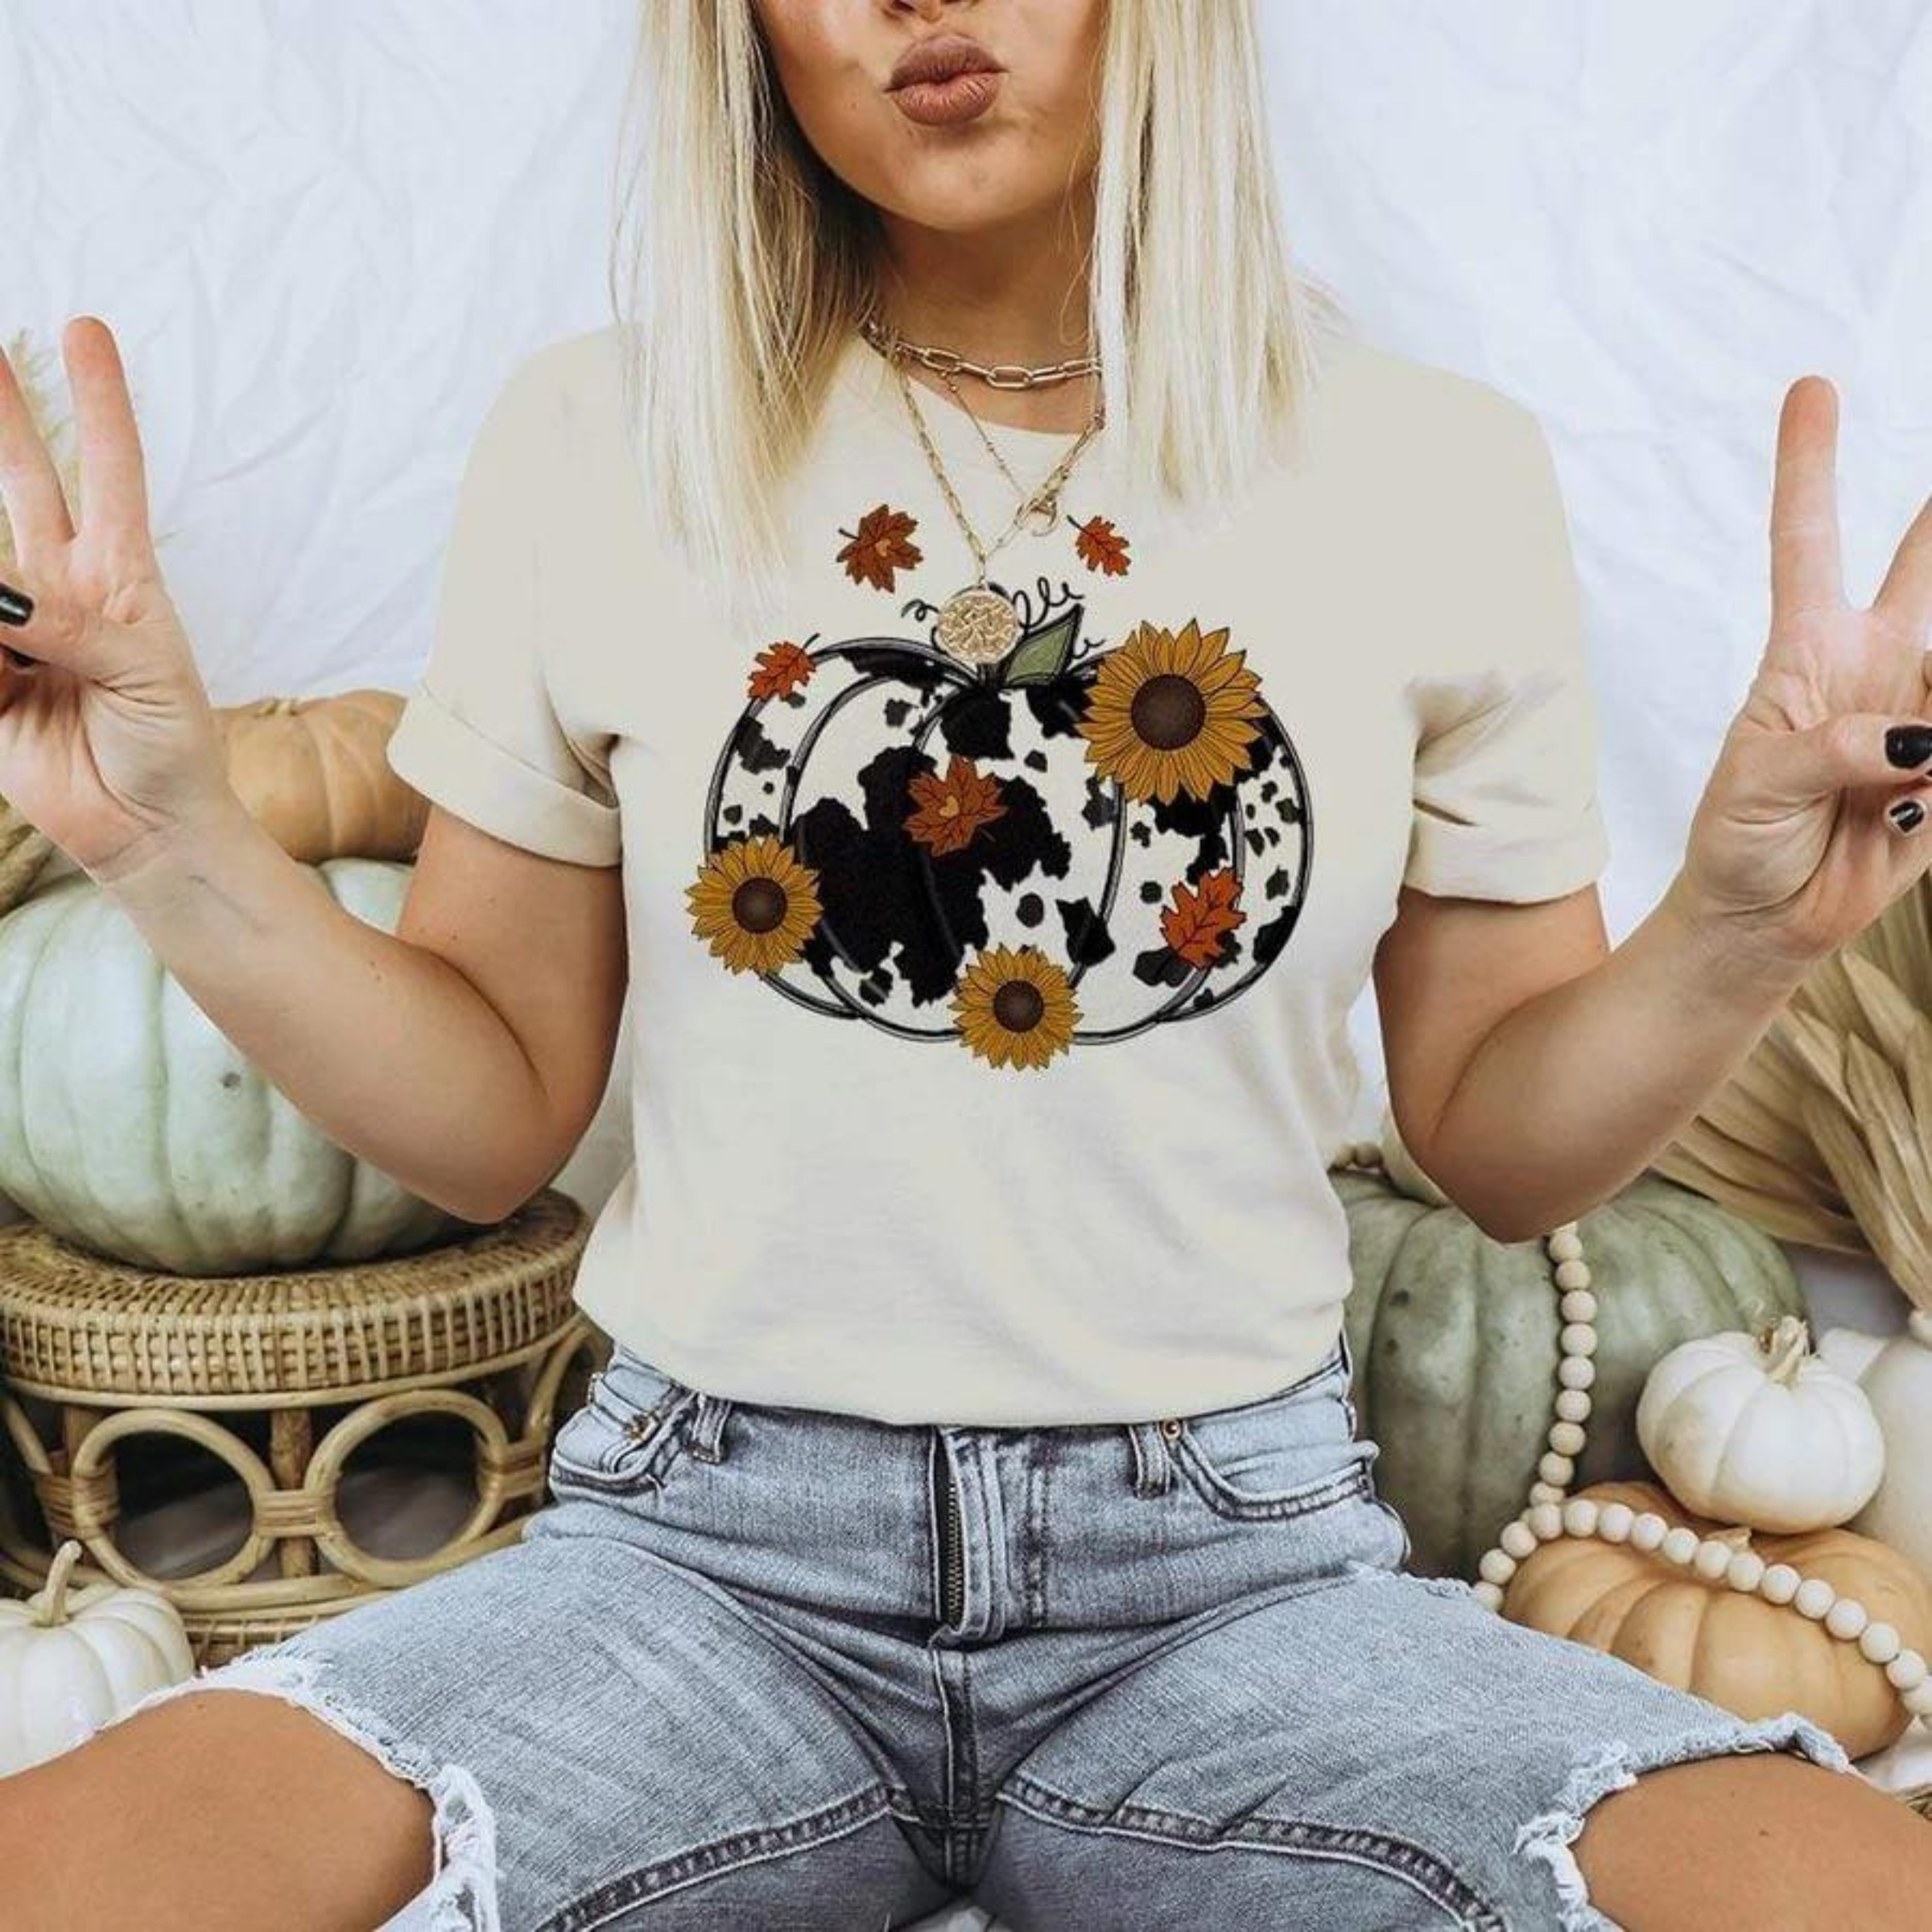 Model is wearing an ivory tee with a pumpkin printed on it. The pumpkin is filled with a cow print and has sunflowers and leaves floating over top of the design. Model is also wearing high waisted ripped jeans. 